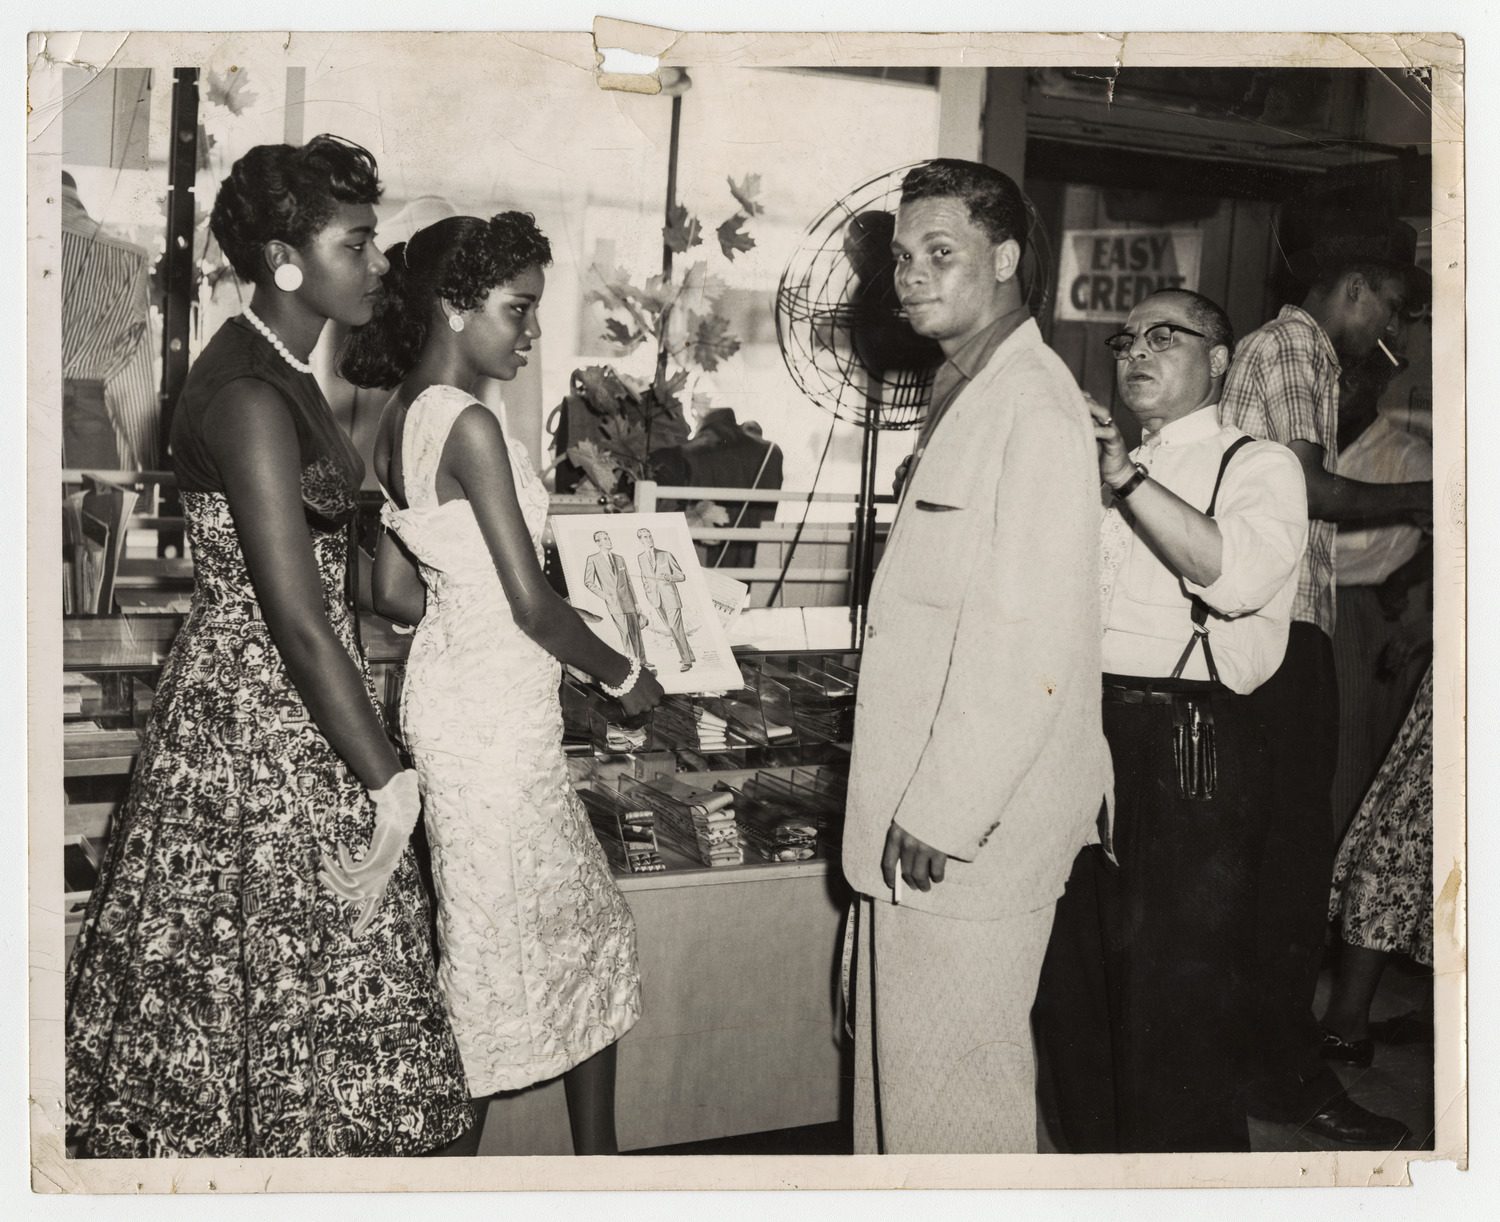 Man being measured for a suit in a clothing store as two women in dresses stand by, circa 1940s-1950s.